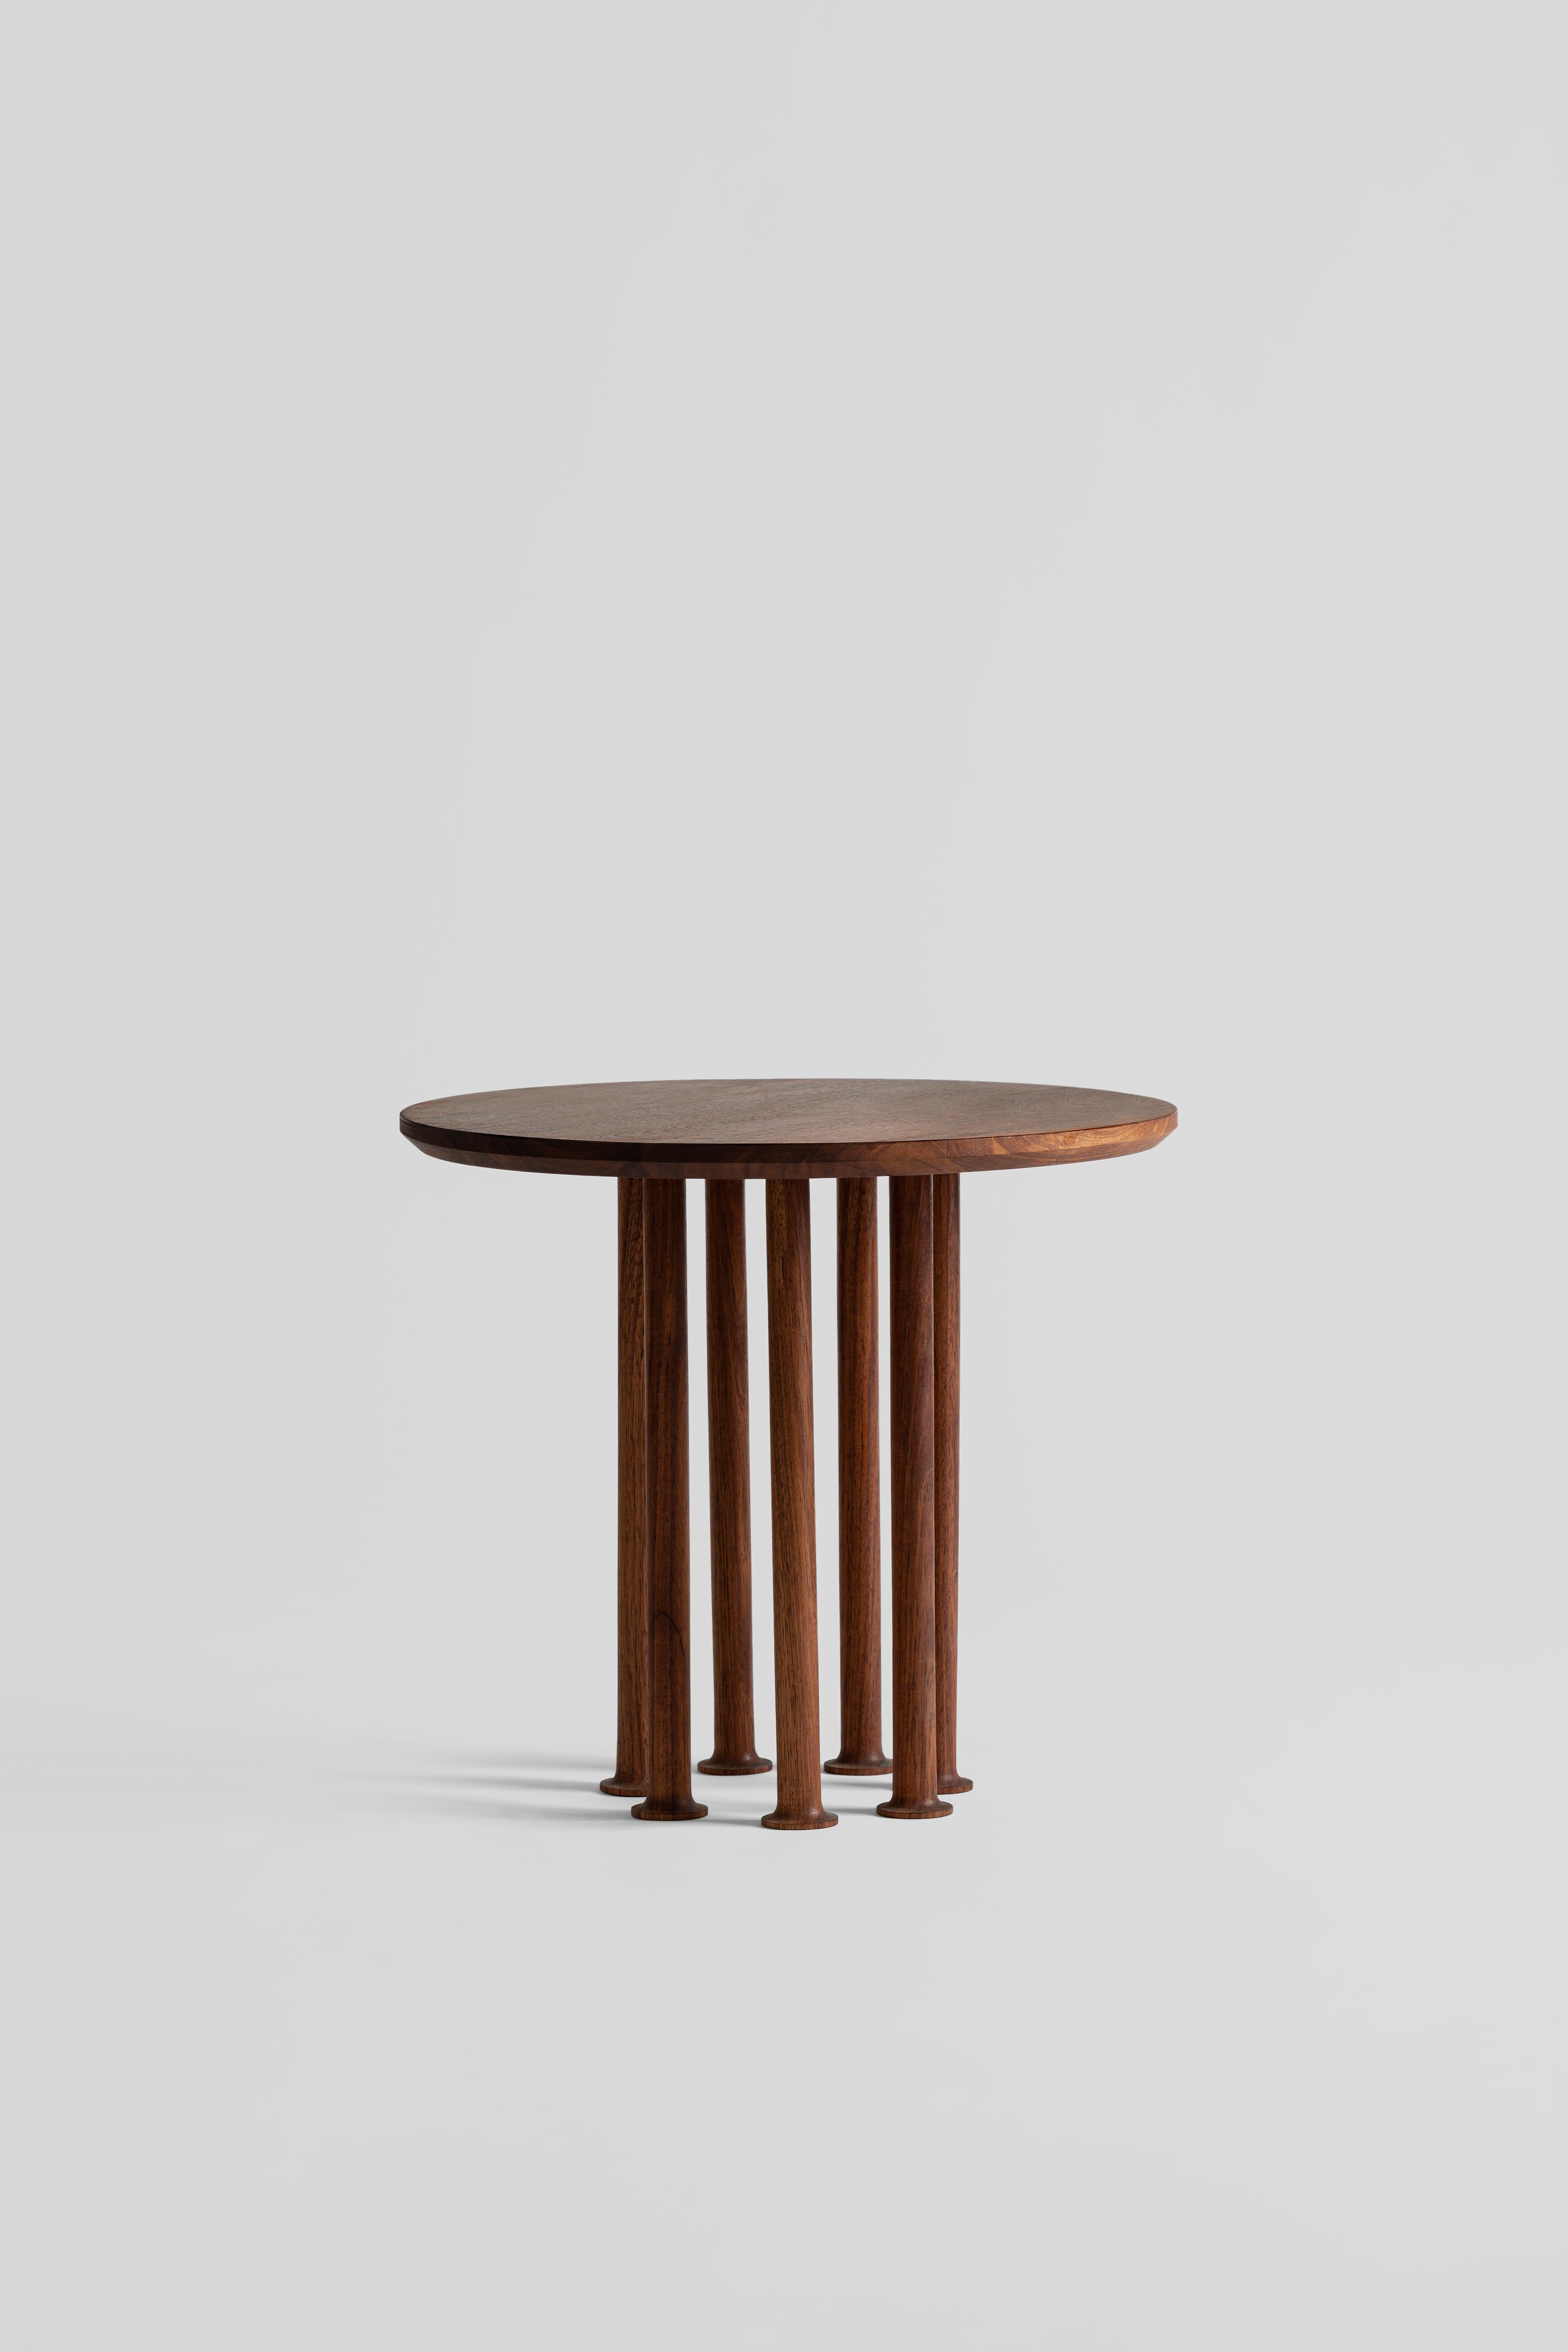 Molinillo is a collection of auxiliary and center tables designed by the Colección Estudio. Each of the legs of the tables were made manually and its intense black color was achieved by carbonizing the wood, a finish inspired by mills. The covers,